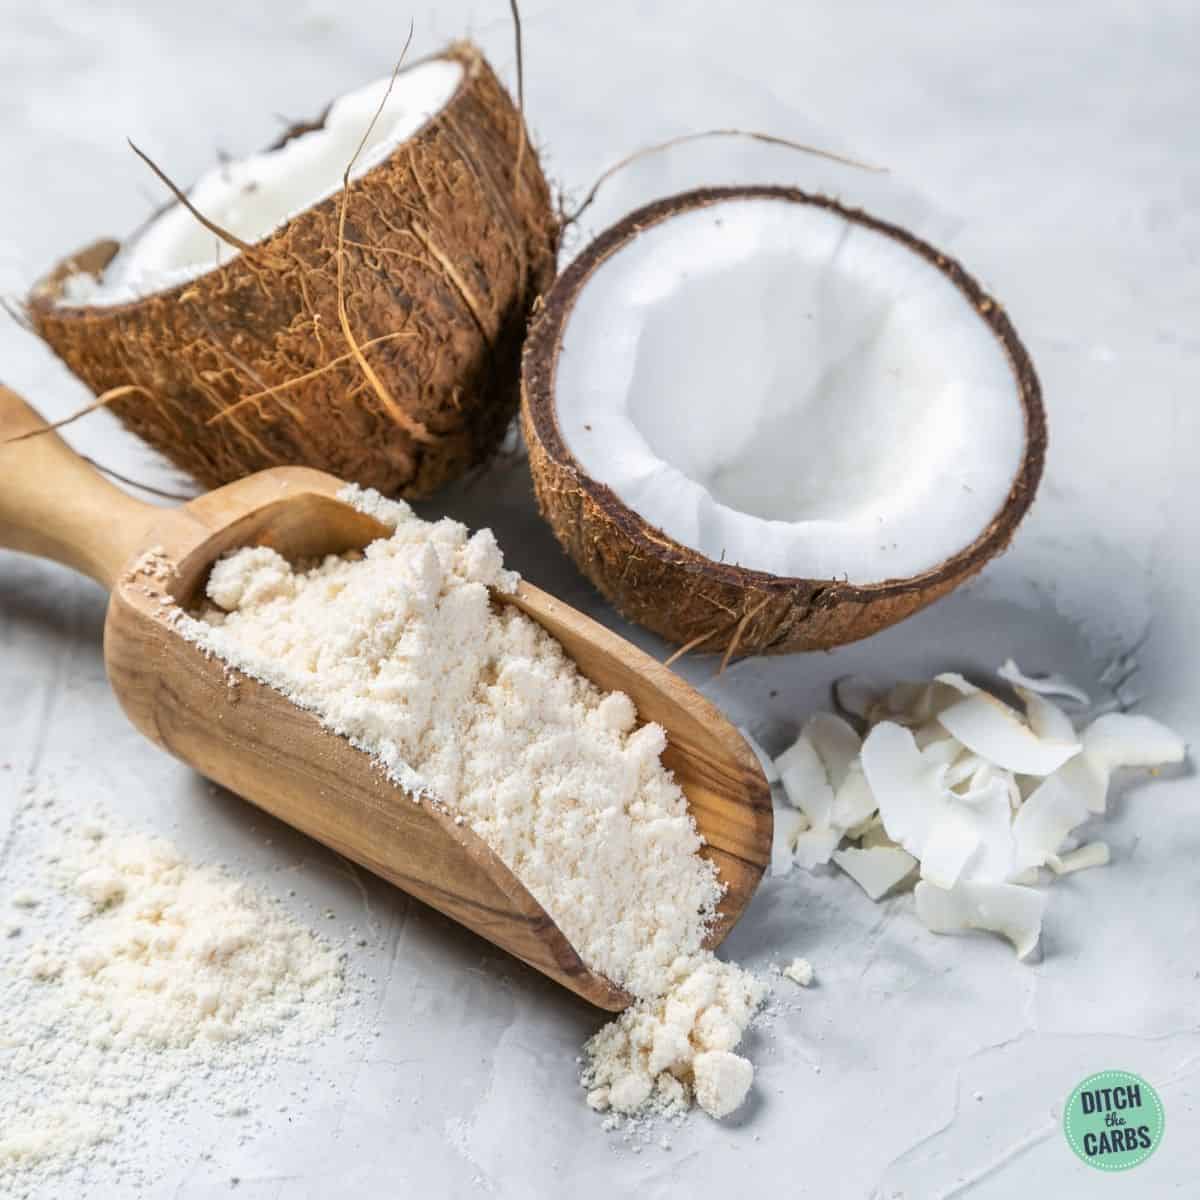 Video: Top 3 Mistakes When Using Coconut Flour for Baking